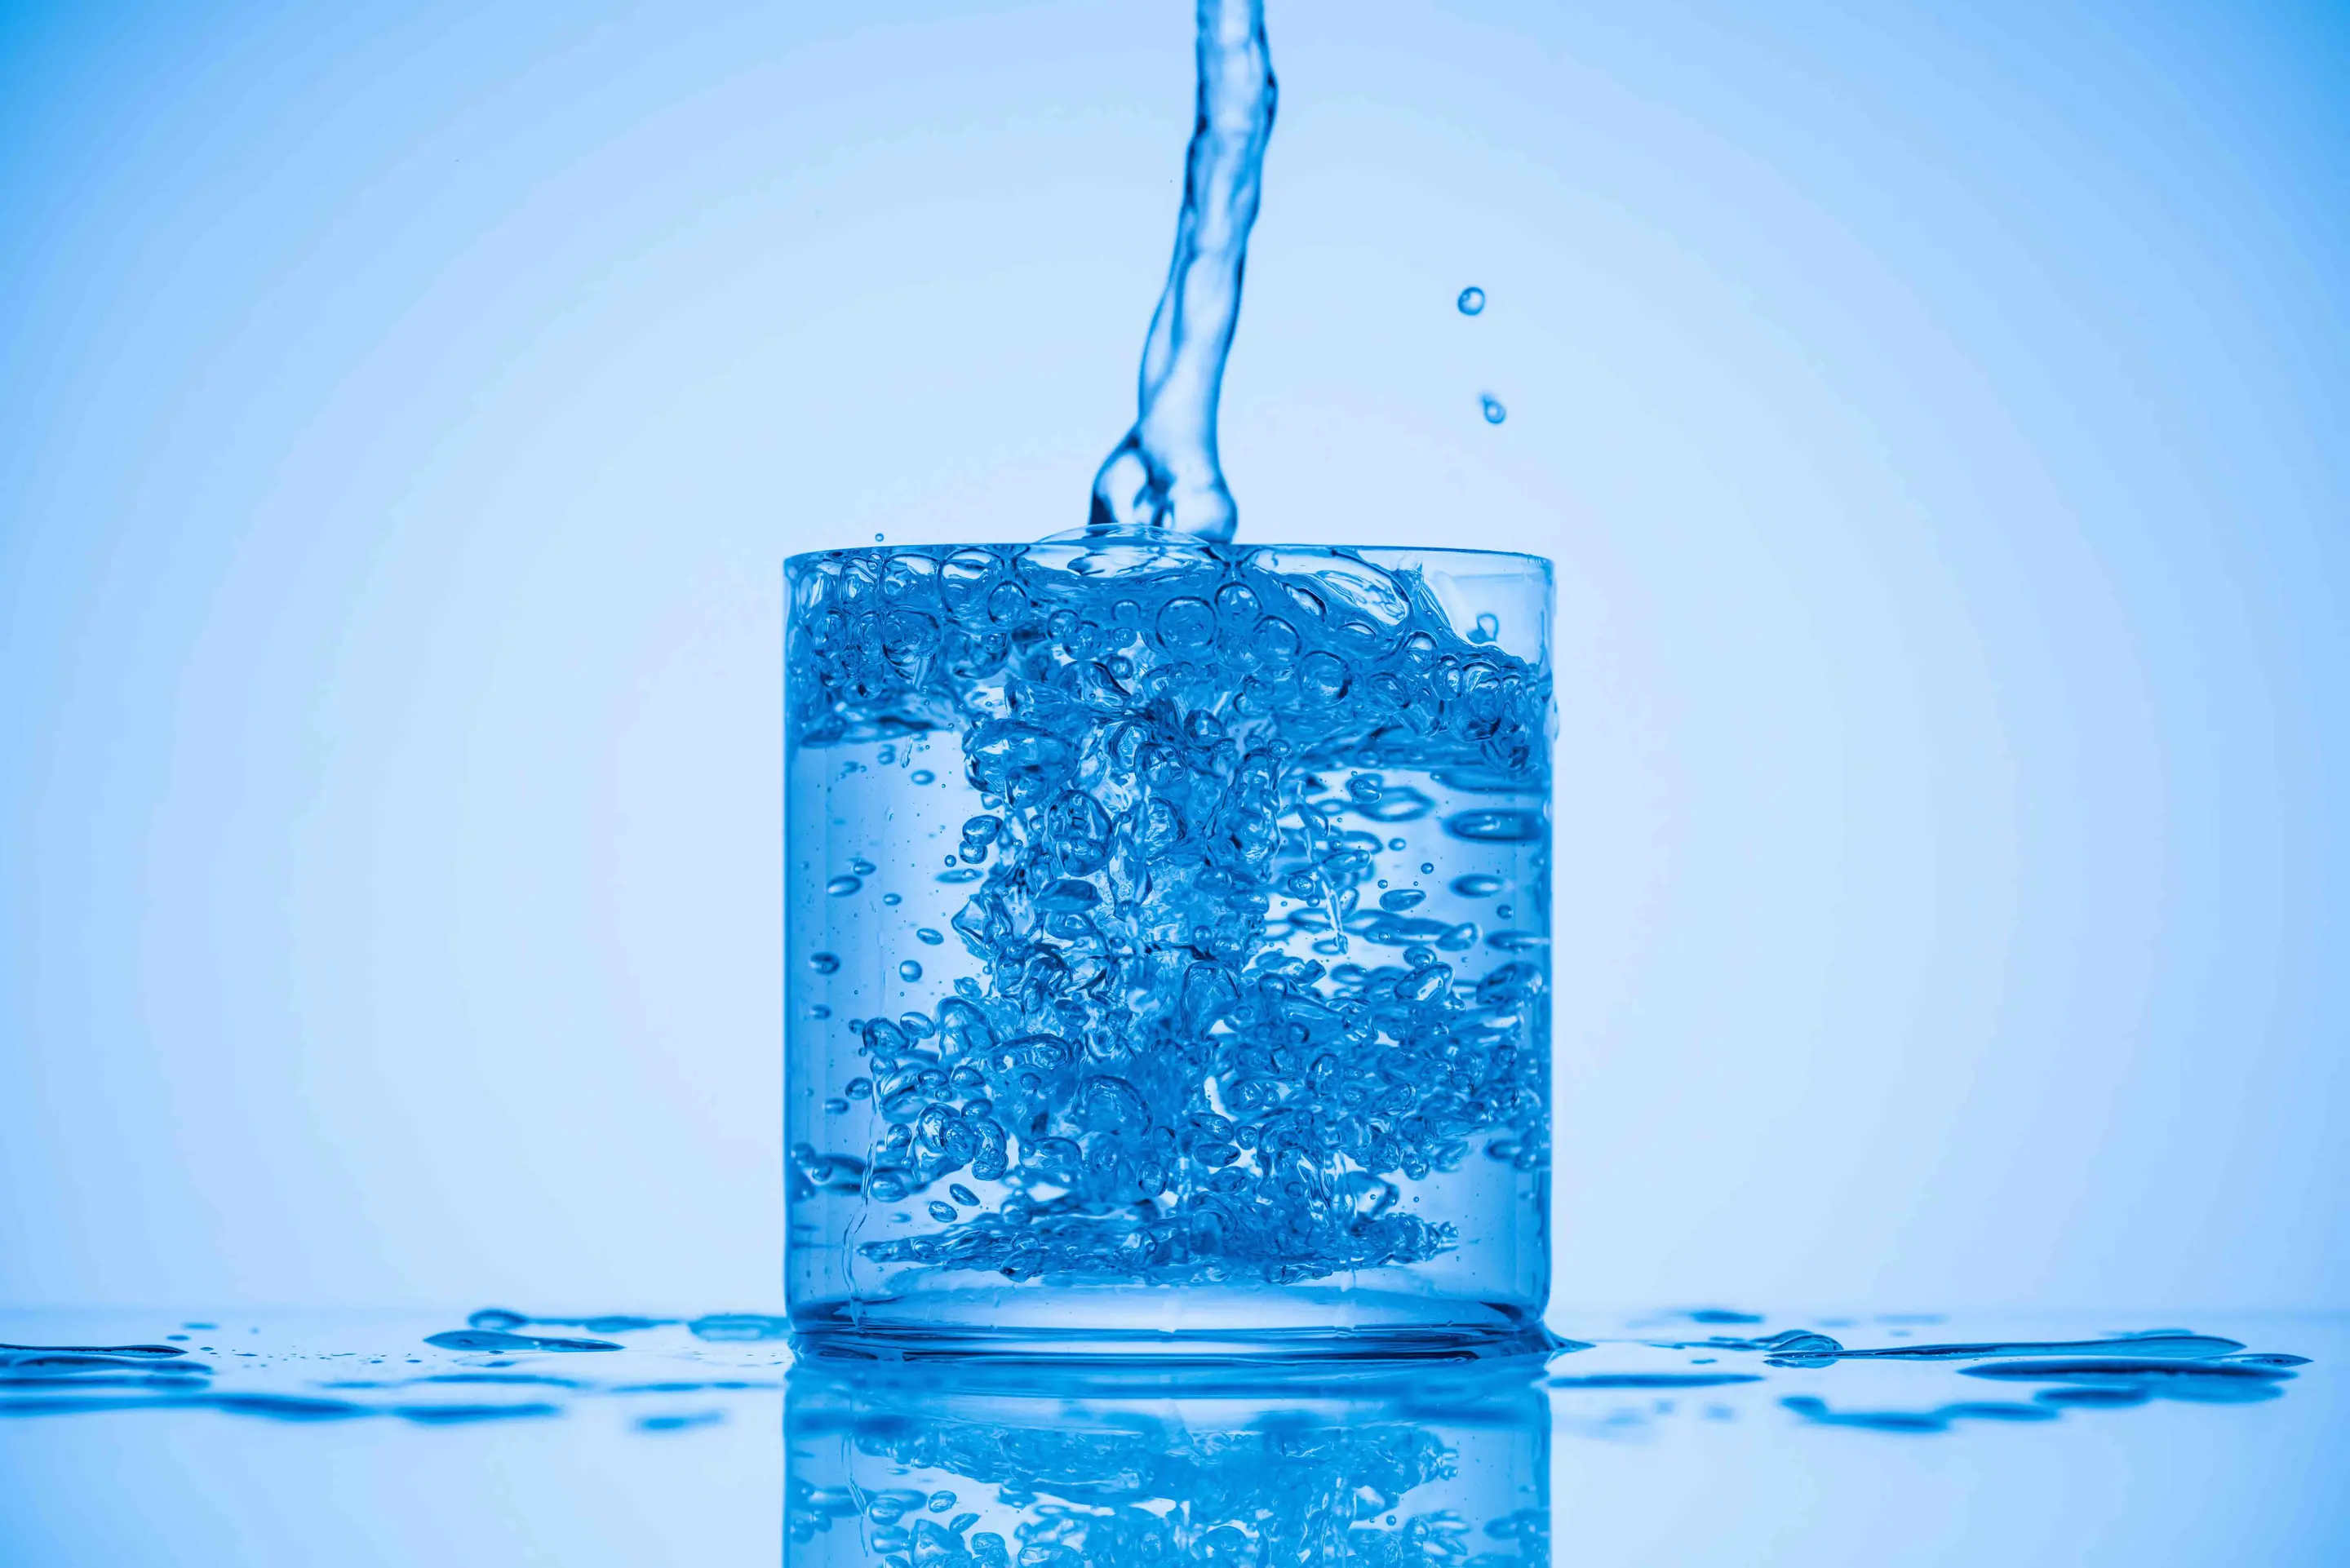 Water pouring into a full cup against a blue background